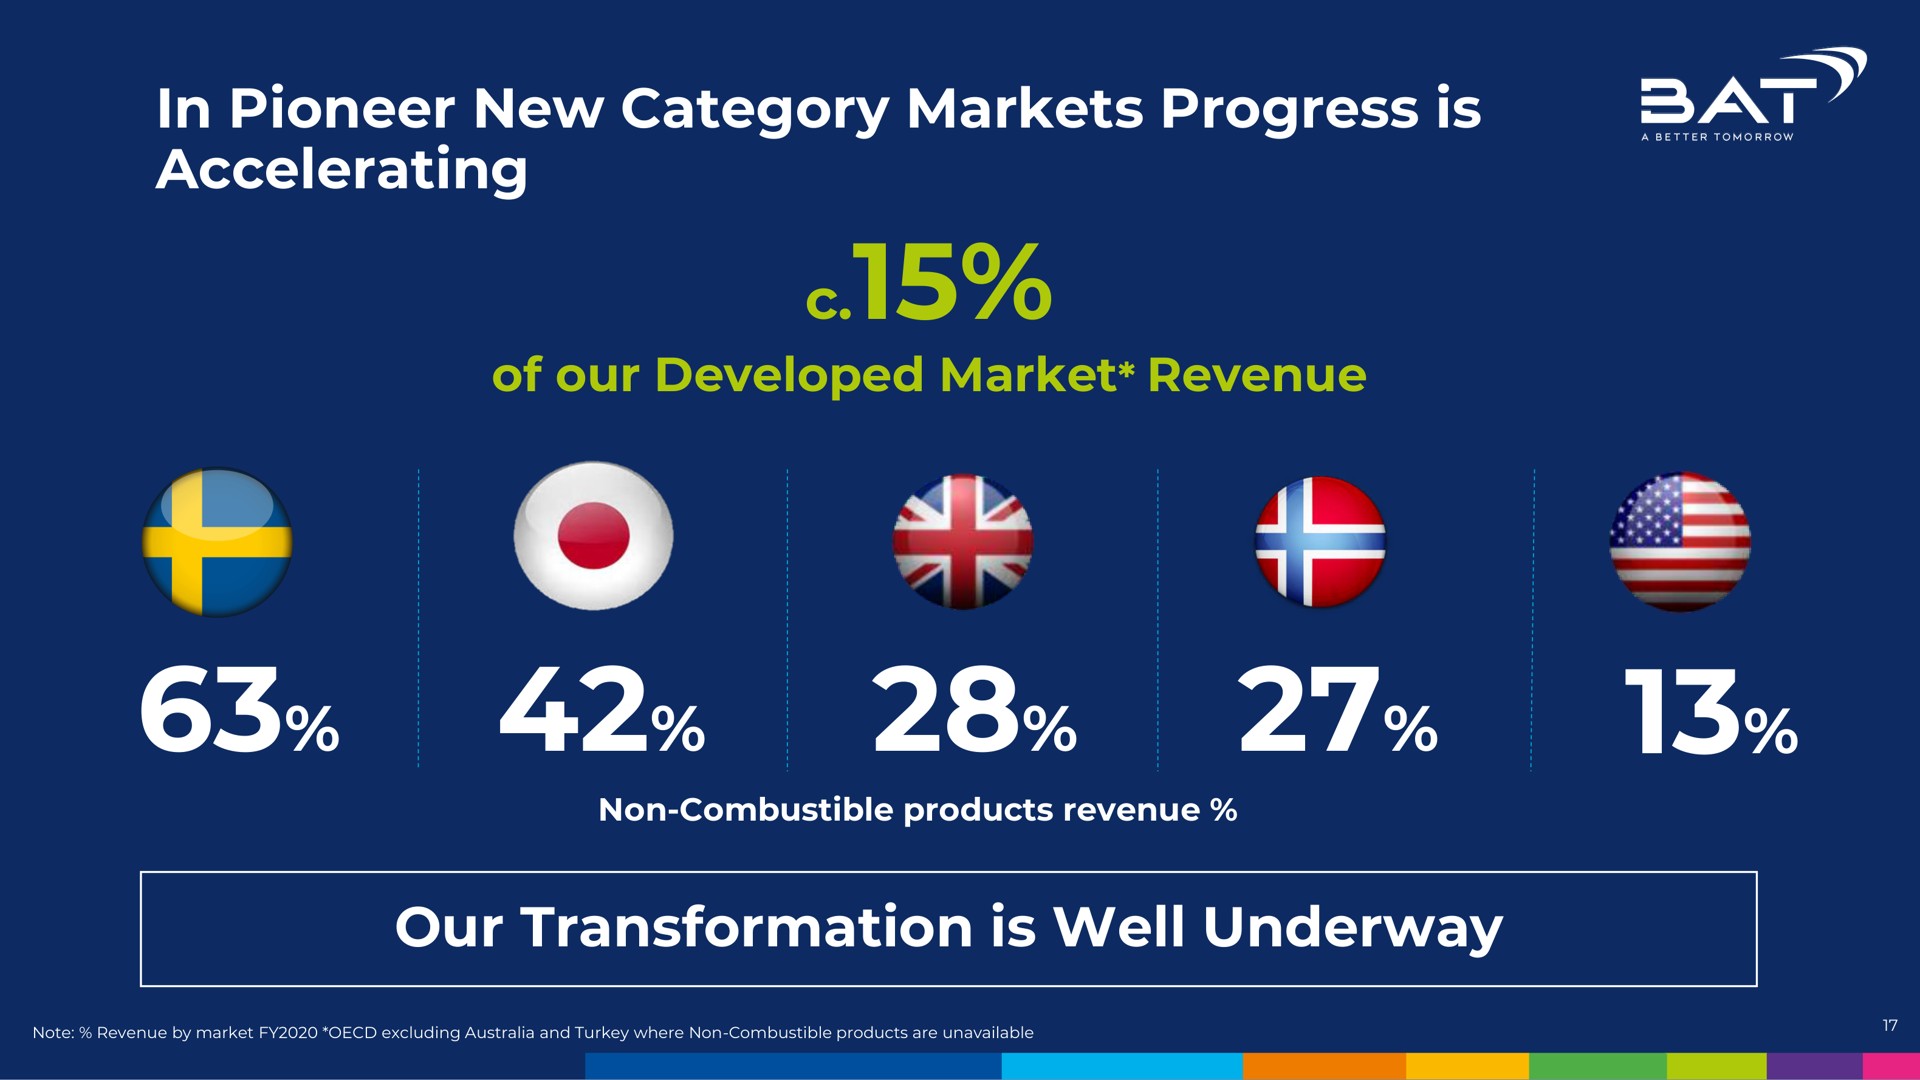 in pioneer new category markets progress is accelerating our transformation is well underway | BAT